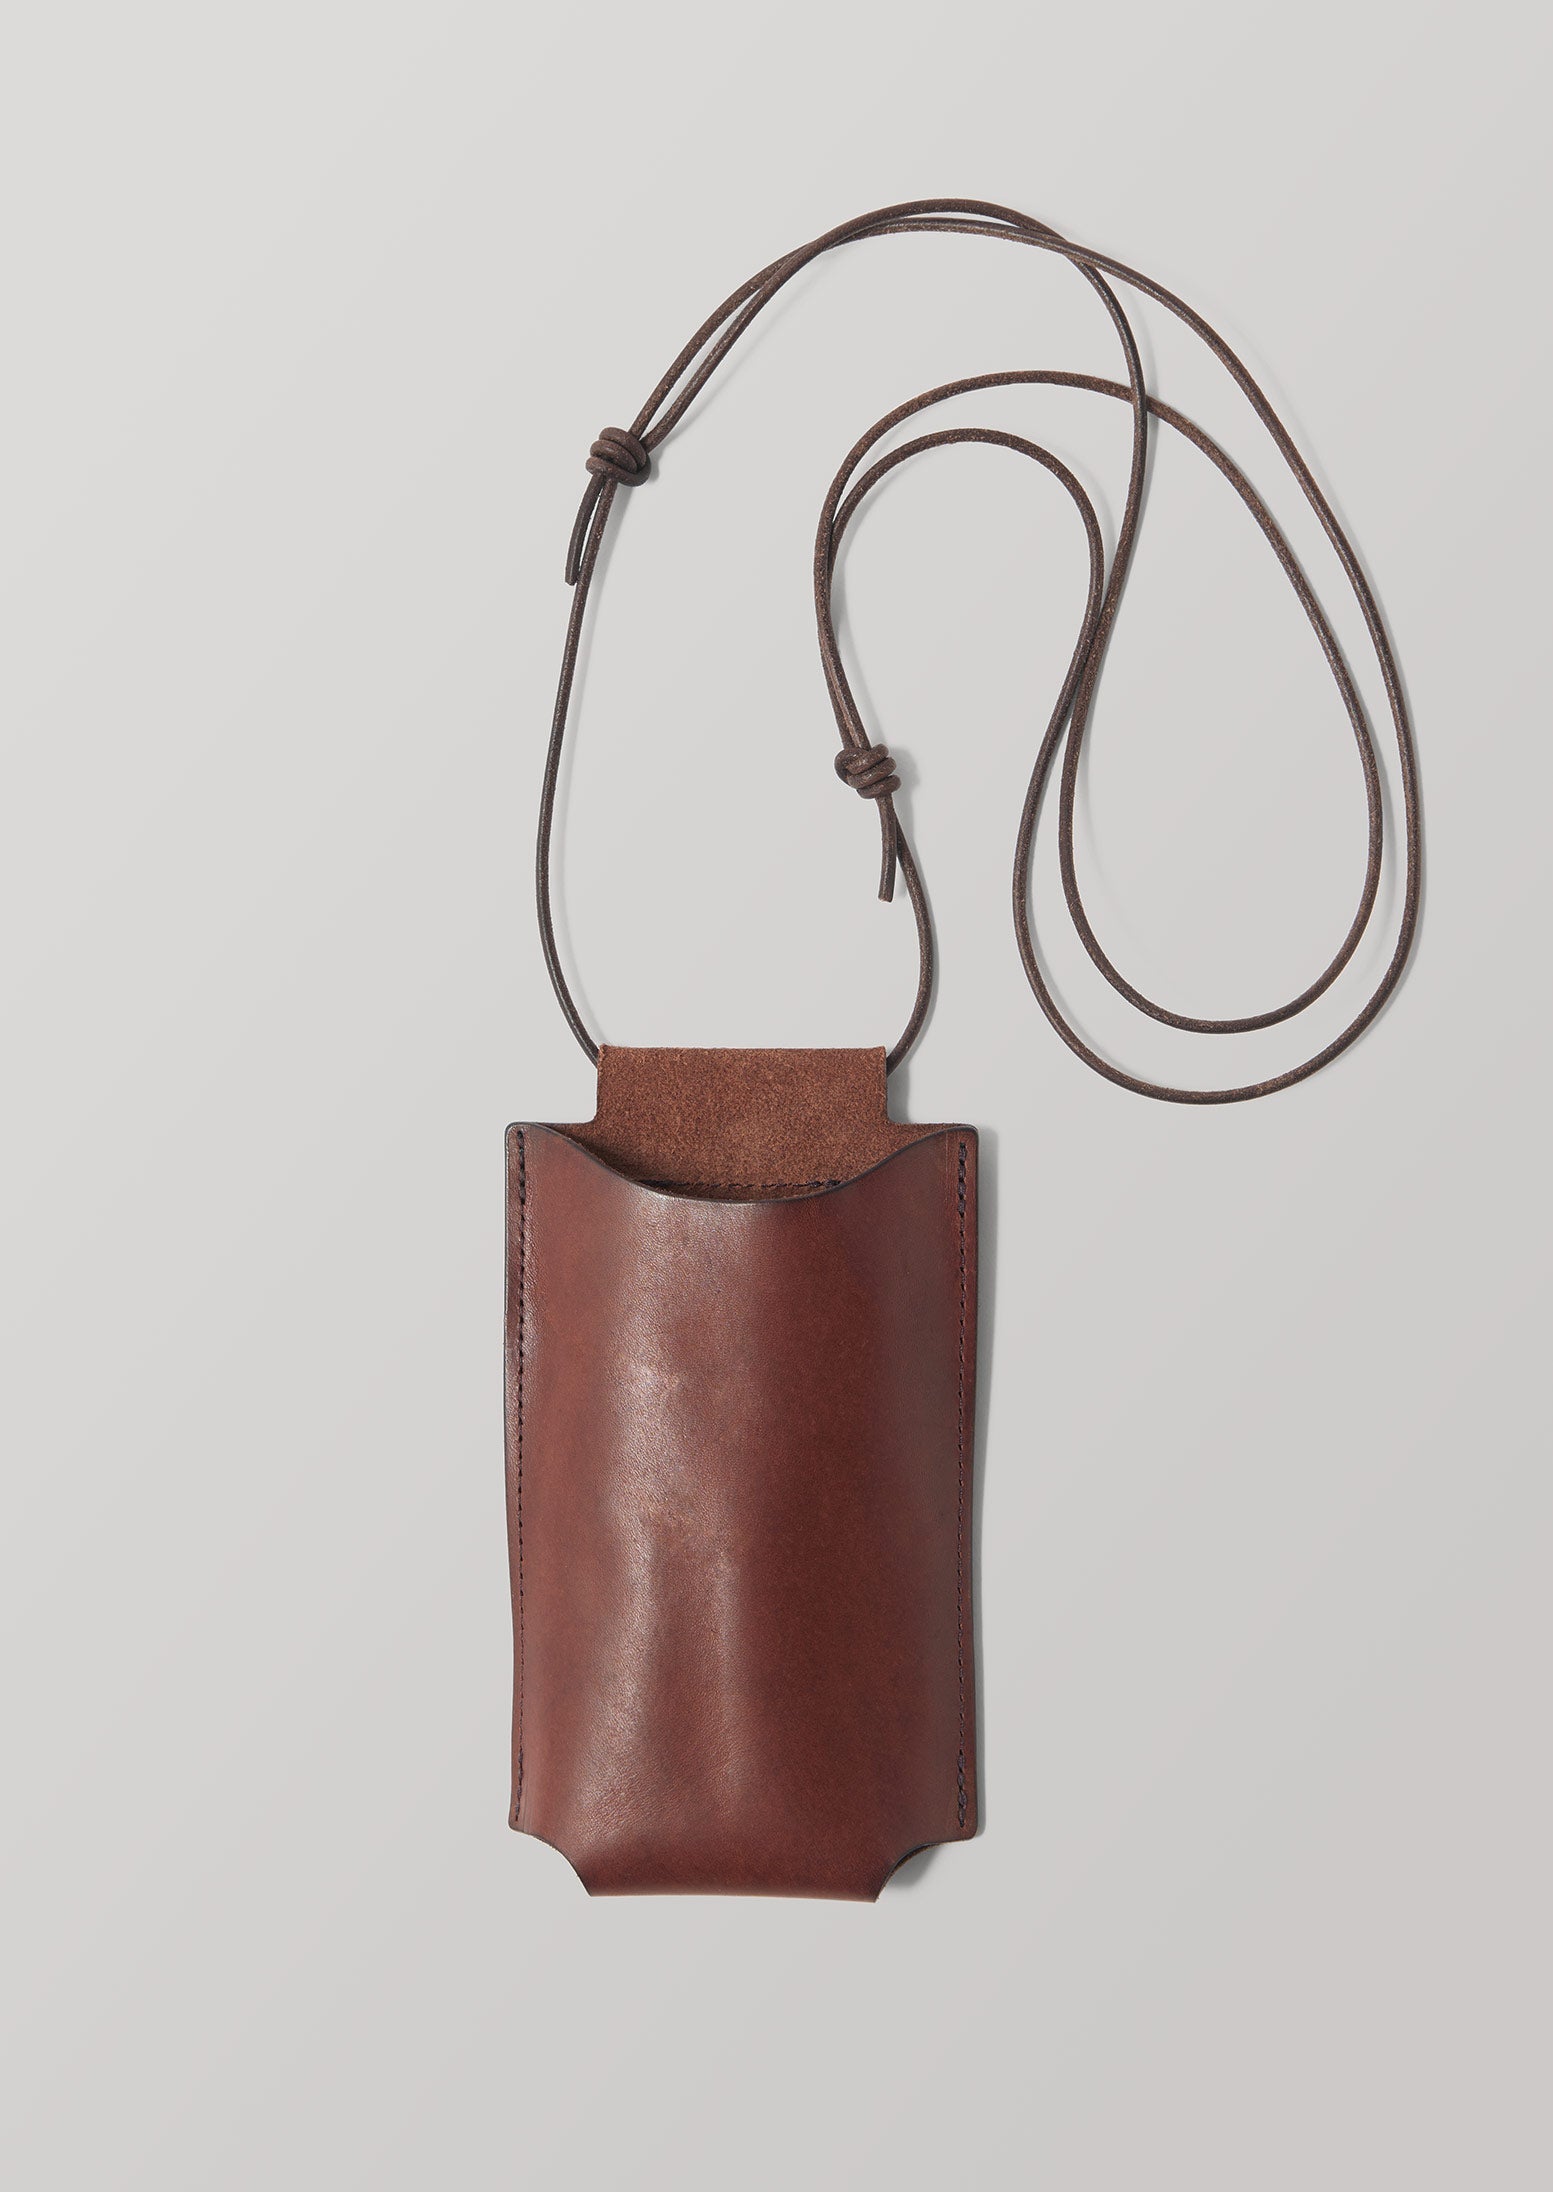 Toast Brown Suede Leather Tote Bag for Minimalist. Simple but Stylish. High  Quality Suede Leather